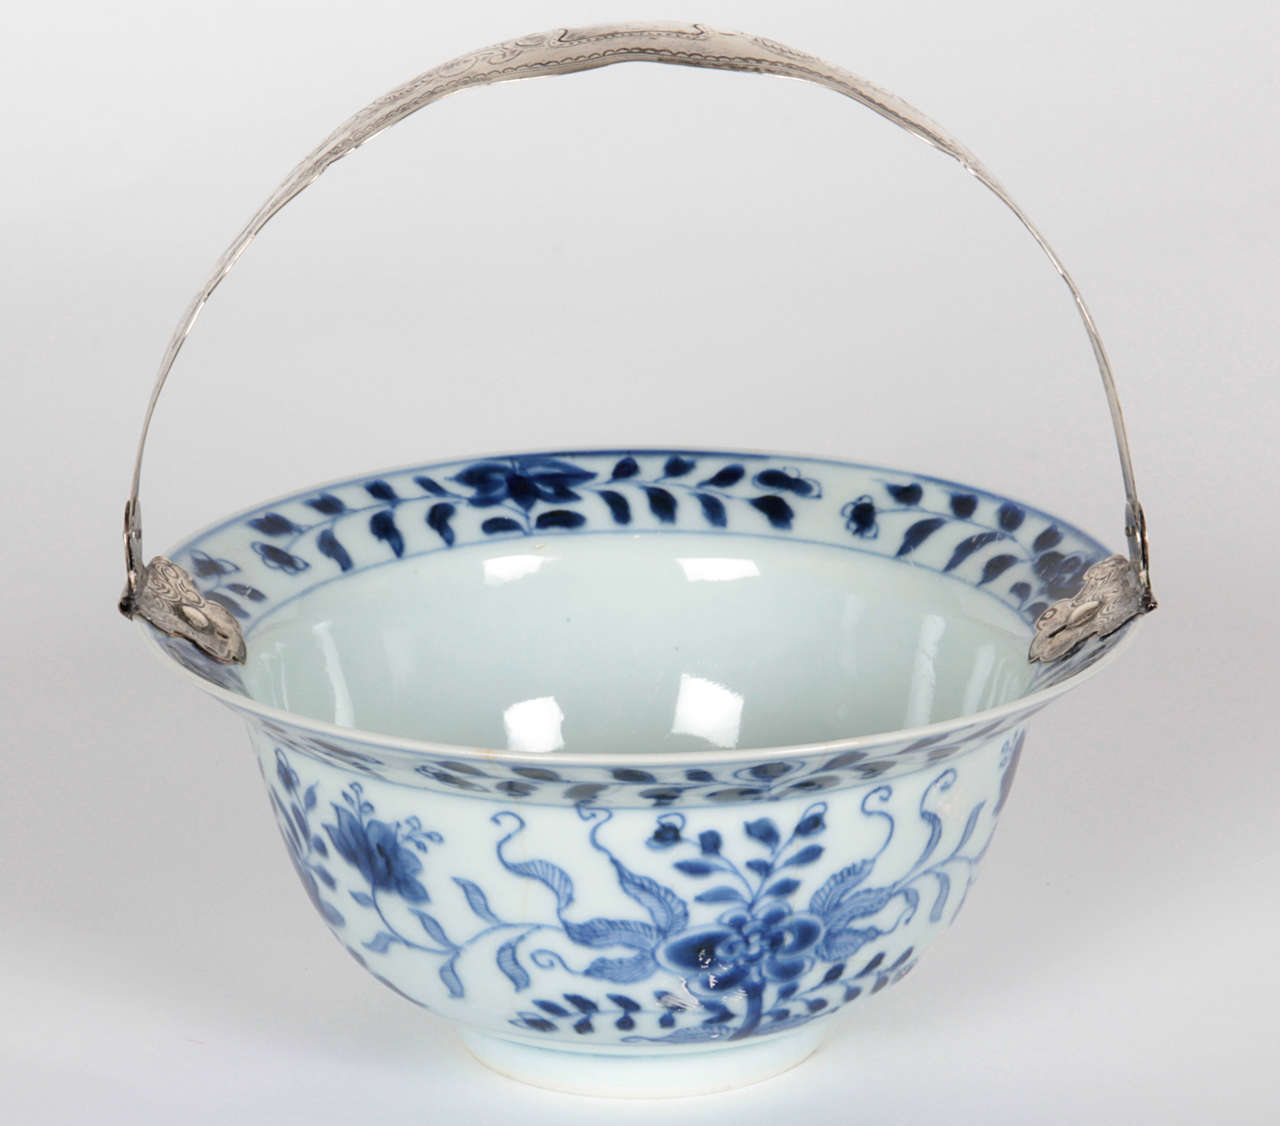 Chinese export blue and white basket with silver handle
Ca 1780